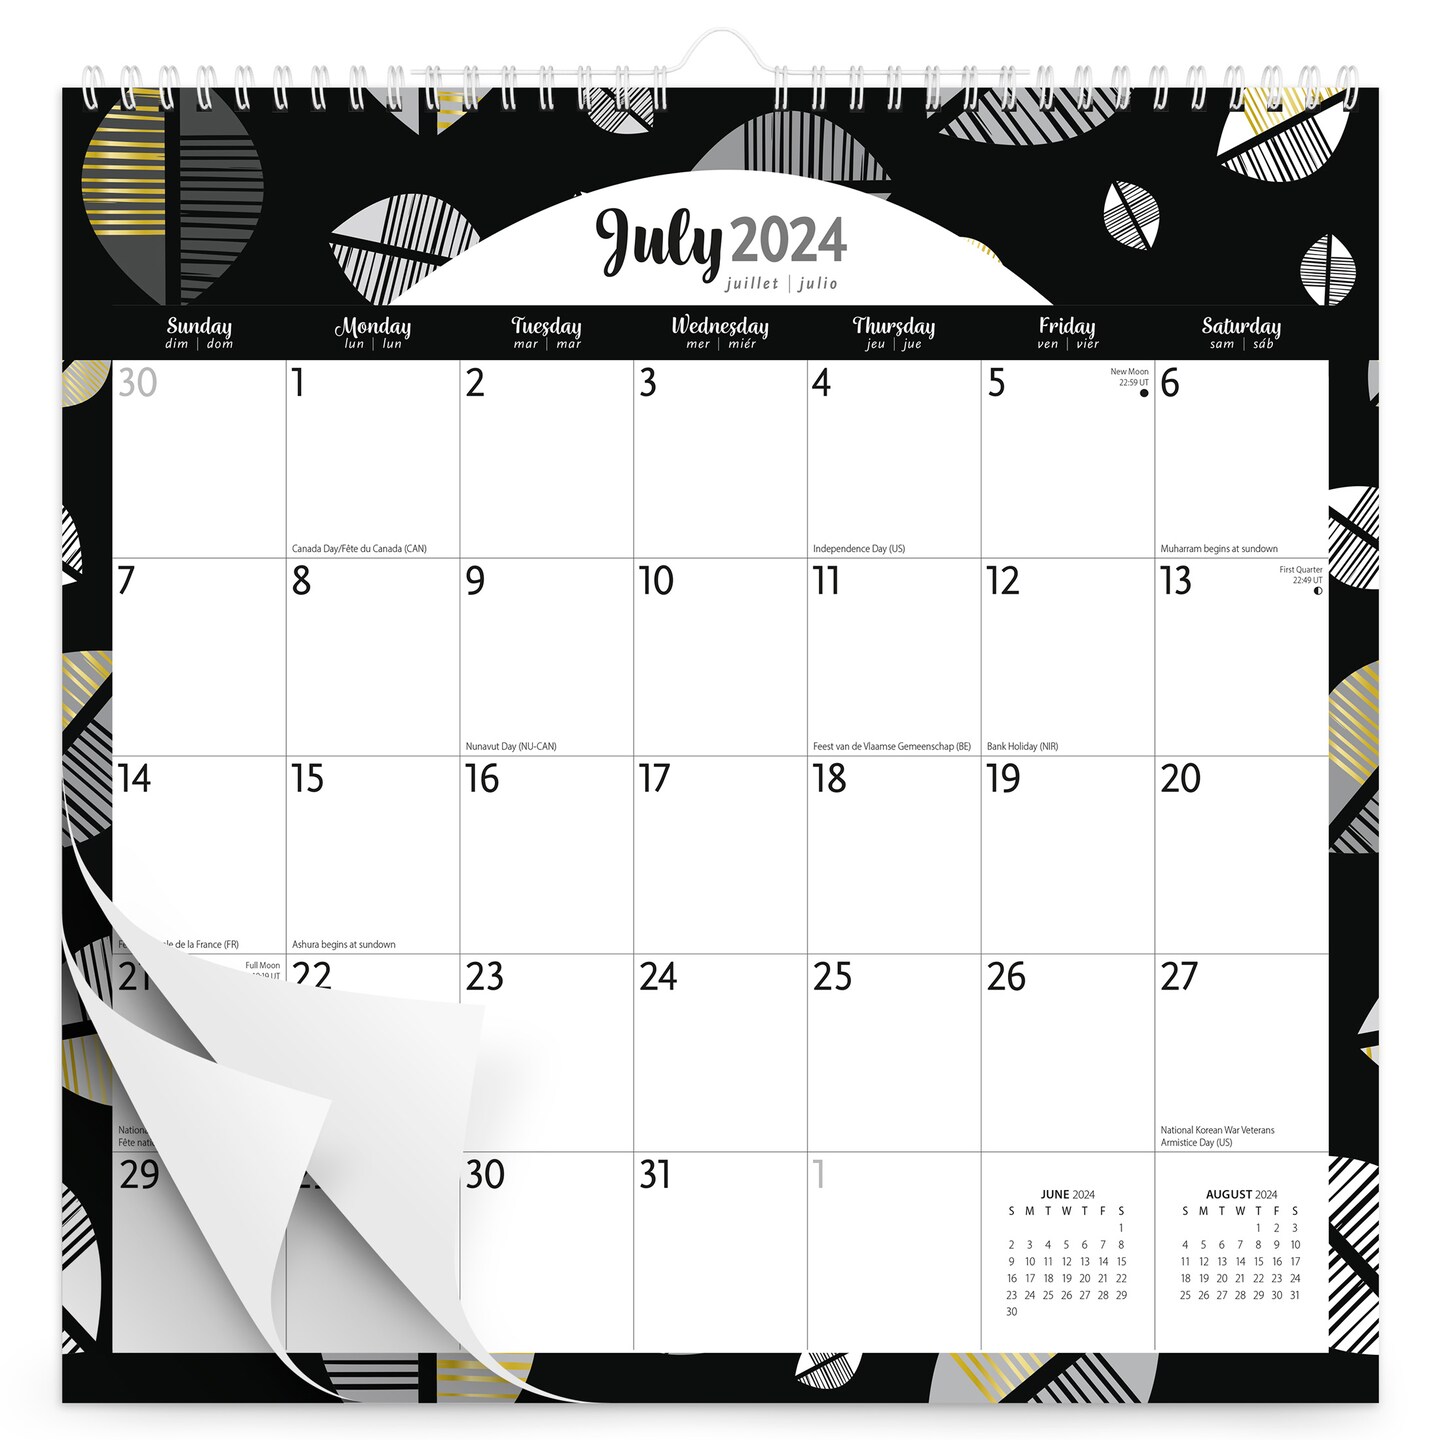 Pen &#x26; Ink | 2025 12 x 12 Inch 18 Months Monthly Square Wire-O Calendar | Sticker Sheet | July 2024 - December 2025 | Plato | Stationery Planning